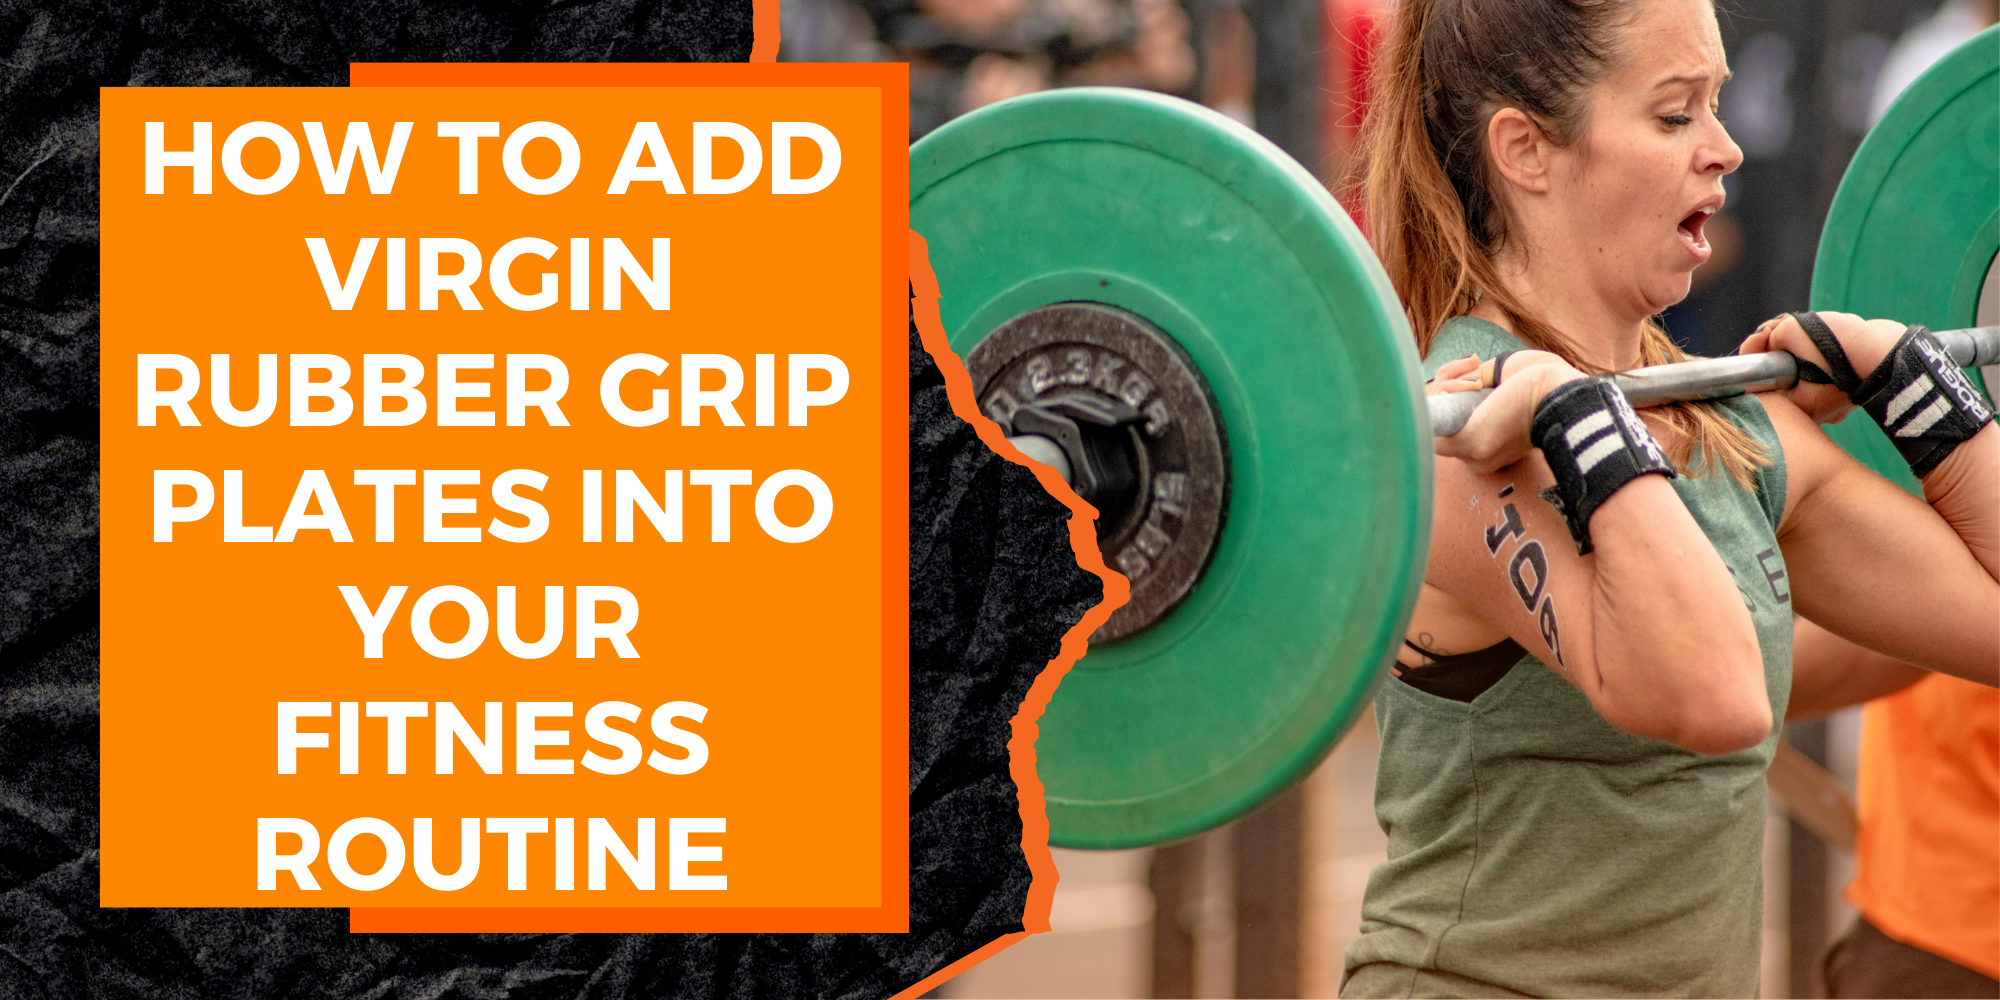 How to Incorporate Virgin Rubber Grip Plates Into Your Fitness Routine